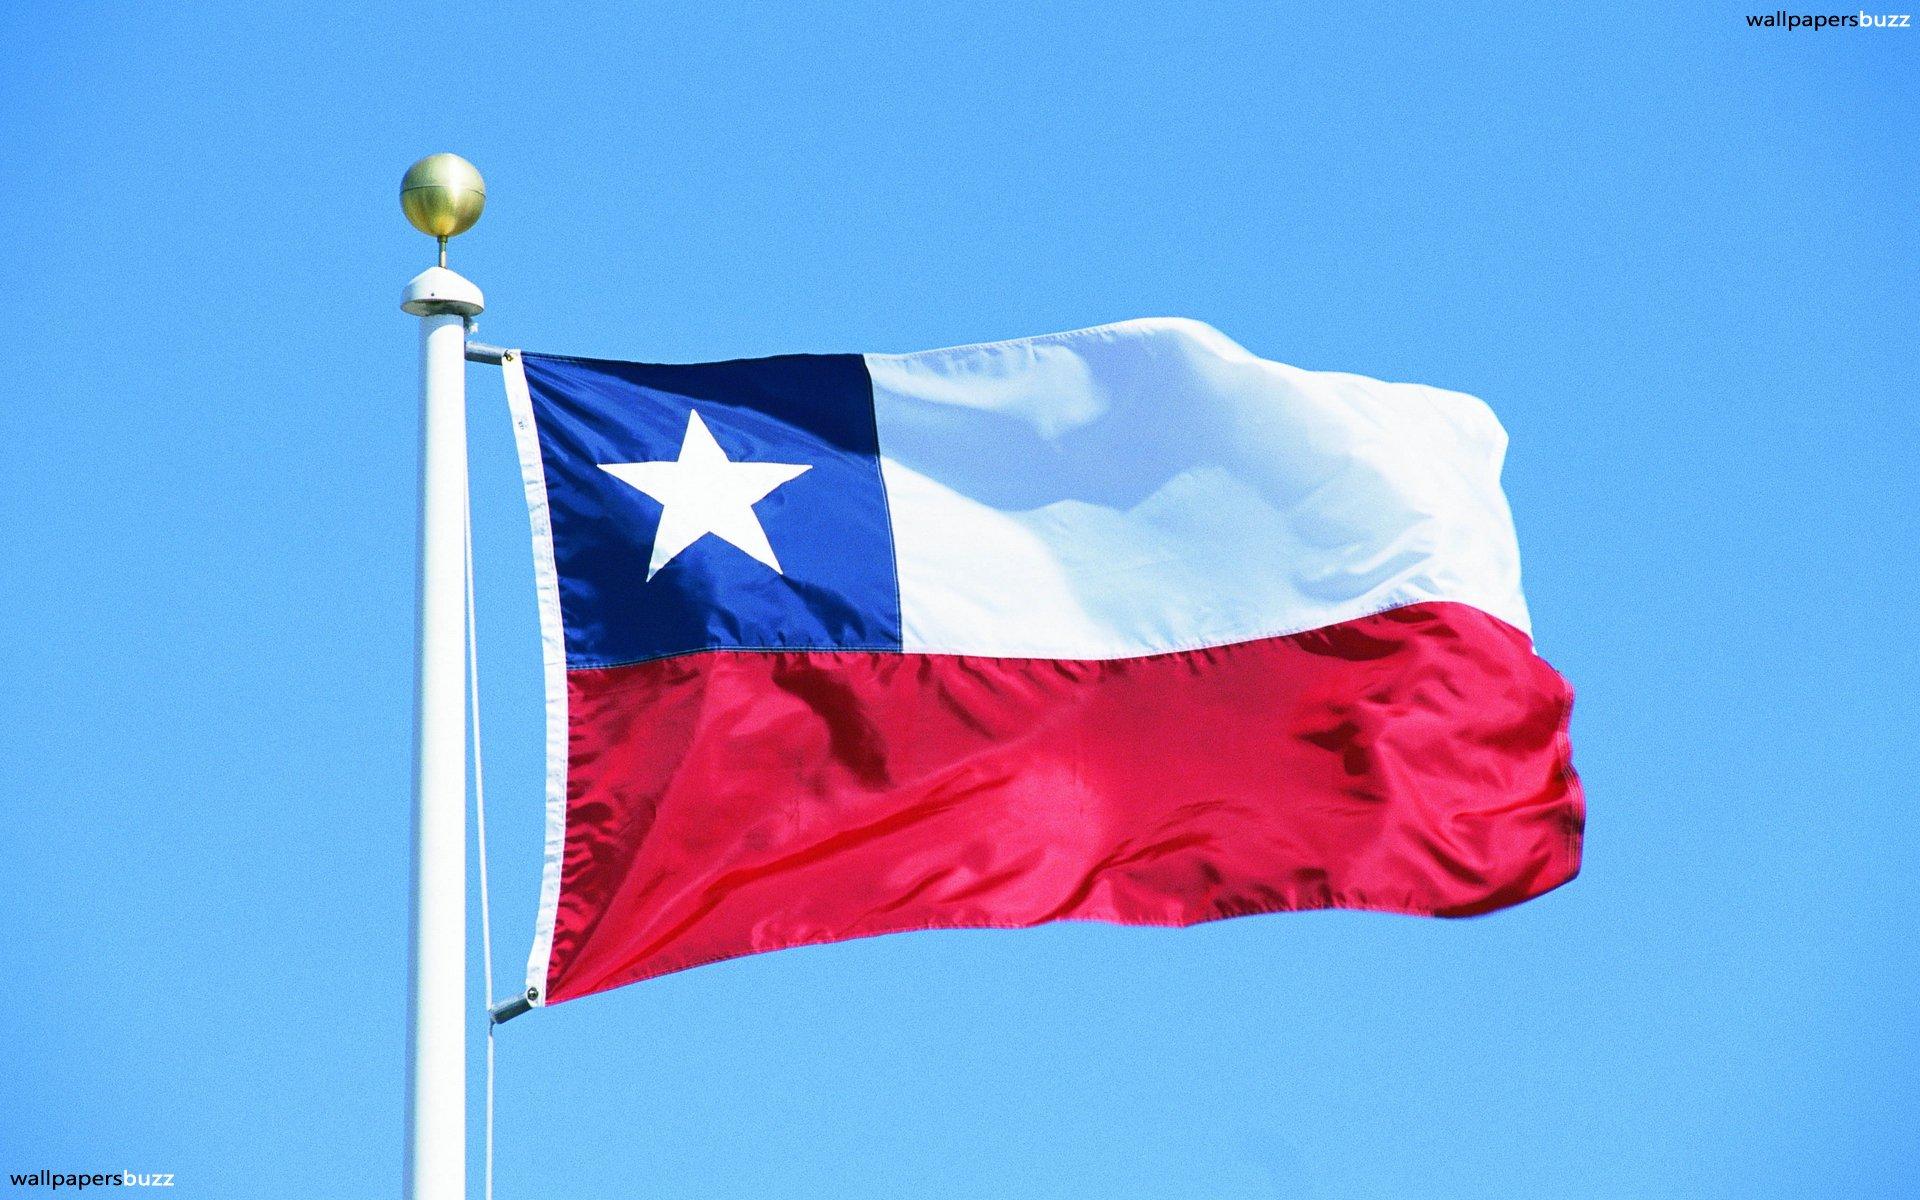 The flag of Chile HD Wallpaper